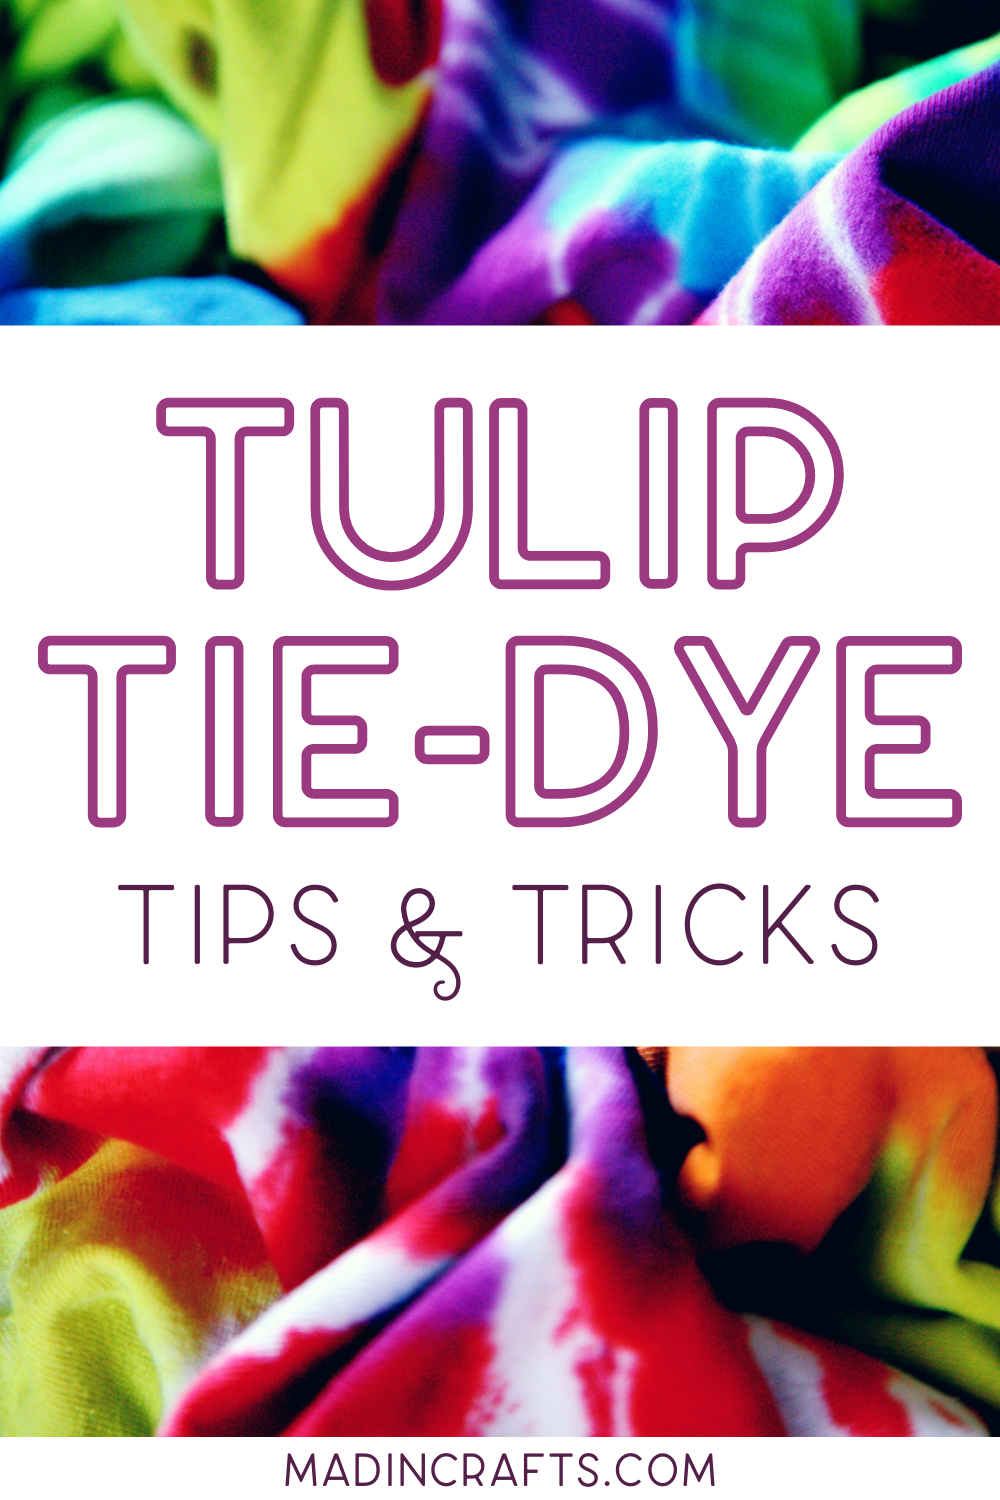 A photo of tie dyed fabric with words overlaid on the photo that read: Tulip Tie-Dye Tips & Tricks